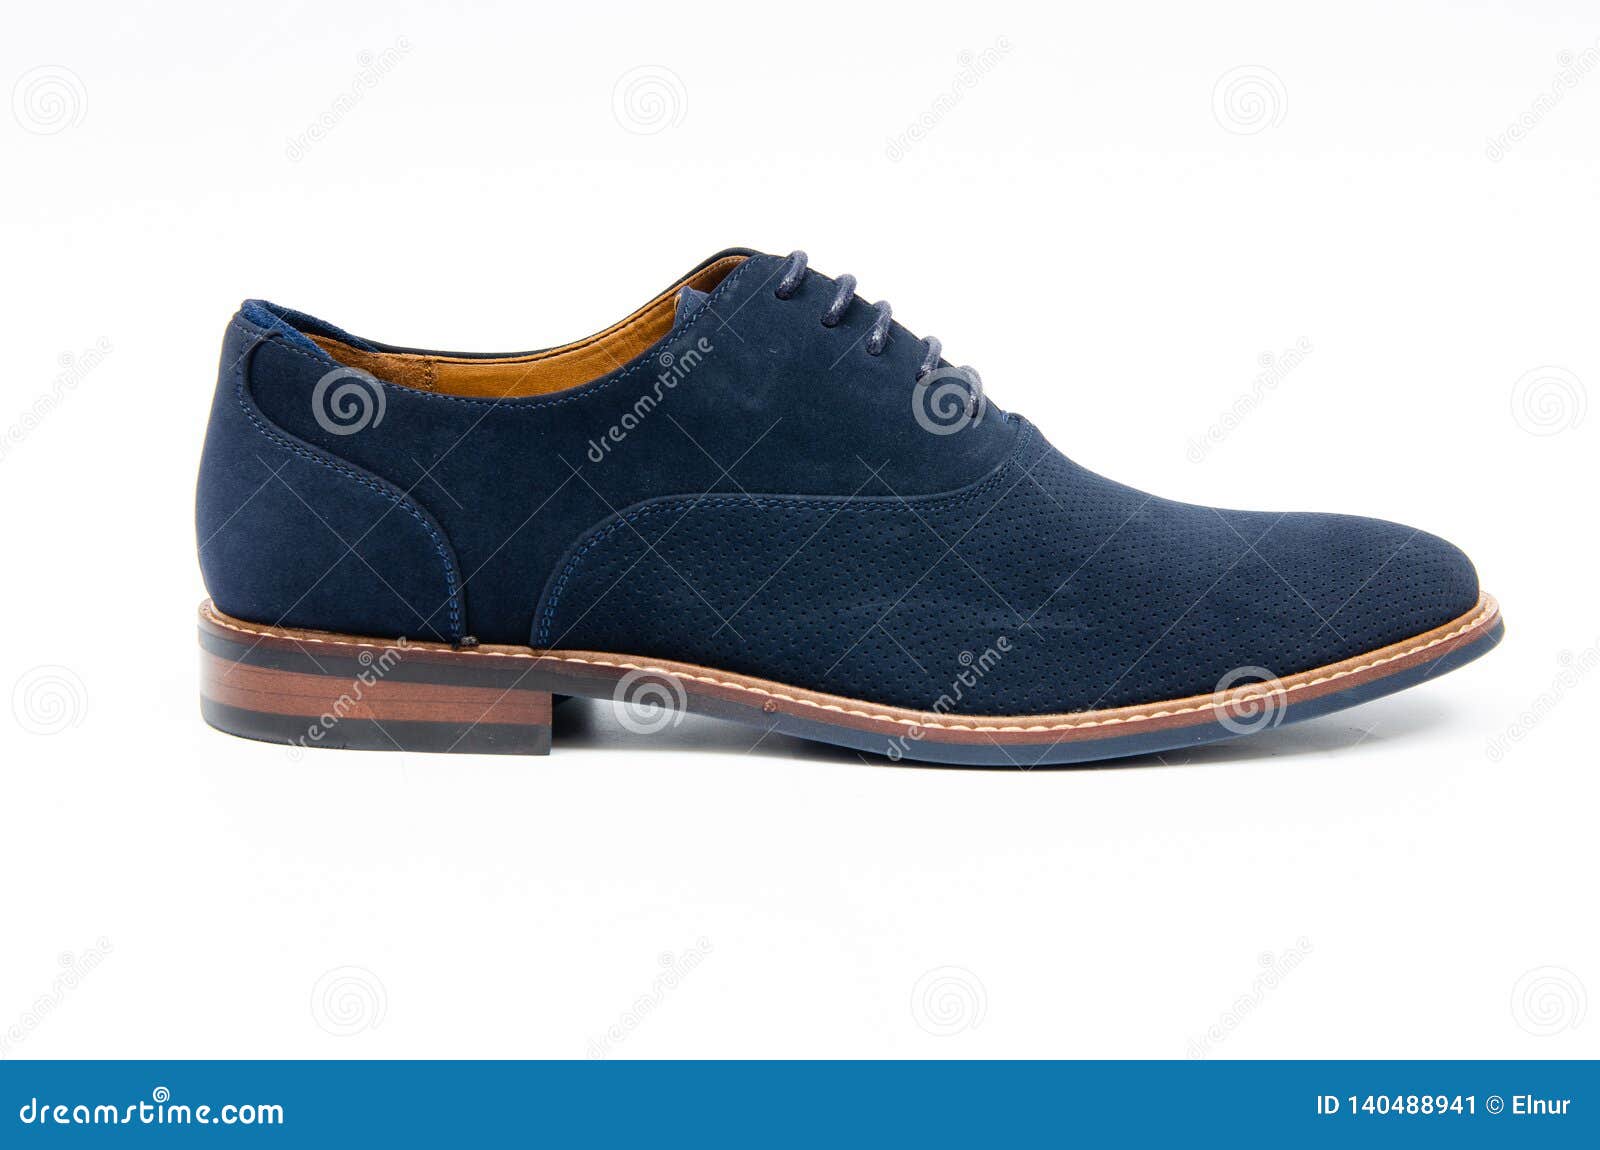 The Blue Suede Shoes Isolated on White Background Stock Image - Image ...